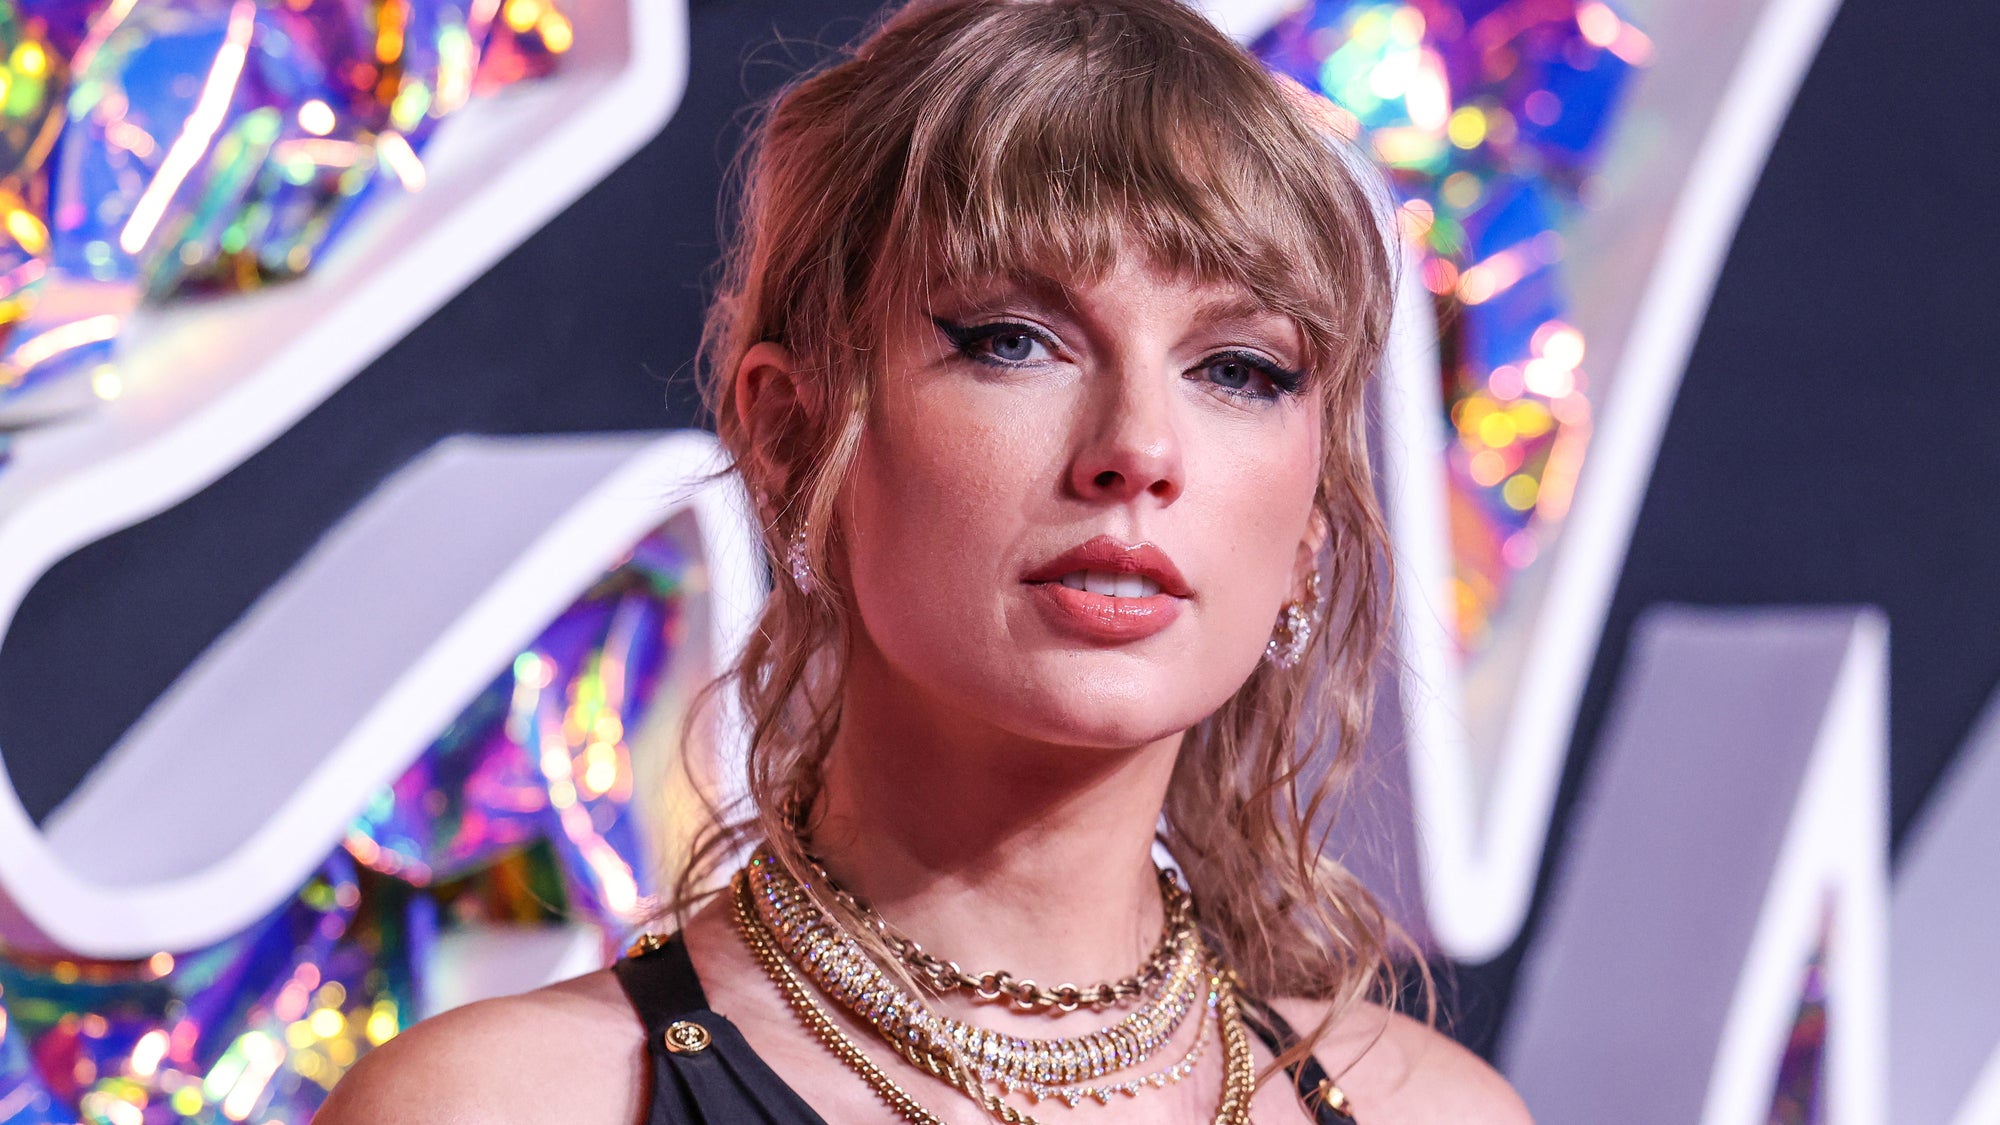 AI-generated Taylor Swift porn deepfakes ran rampant on X. Will legal guidelines catch up?